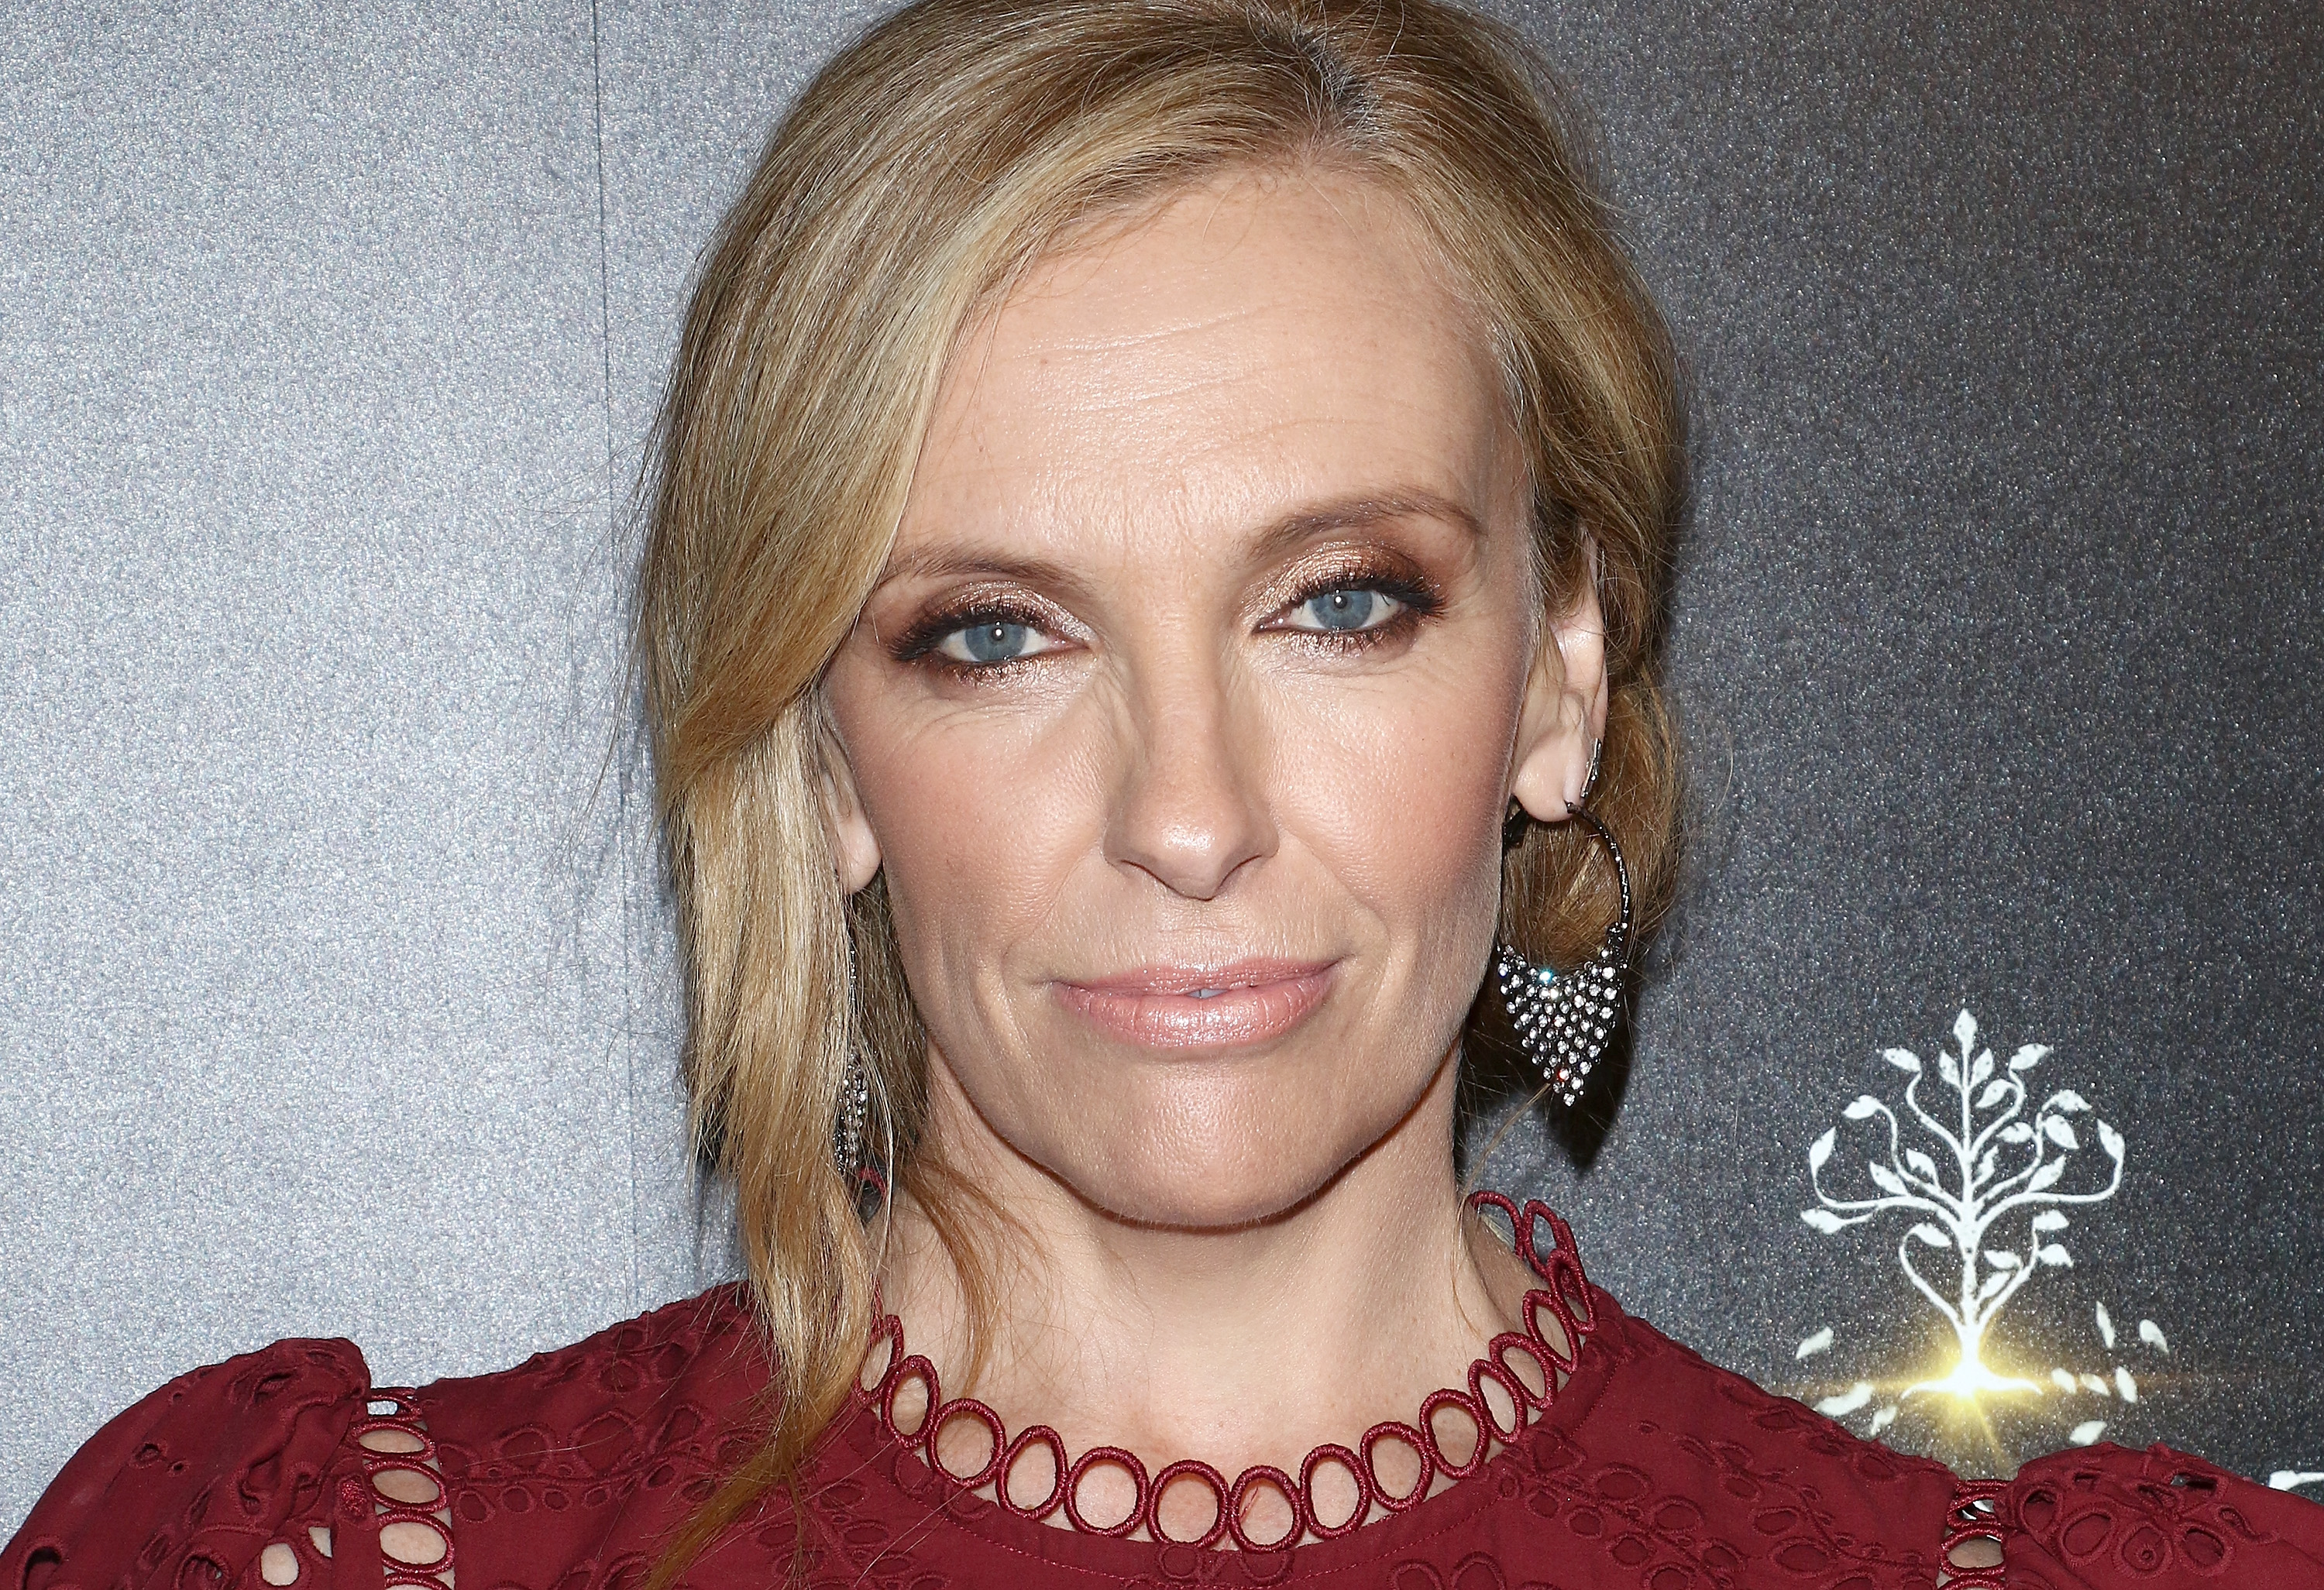 Toni Collette attends the screening of "Hereditary" hosted by A24 at Metrograph on June 5, 2018 in New York City. (Jim Spellman—WireImage)